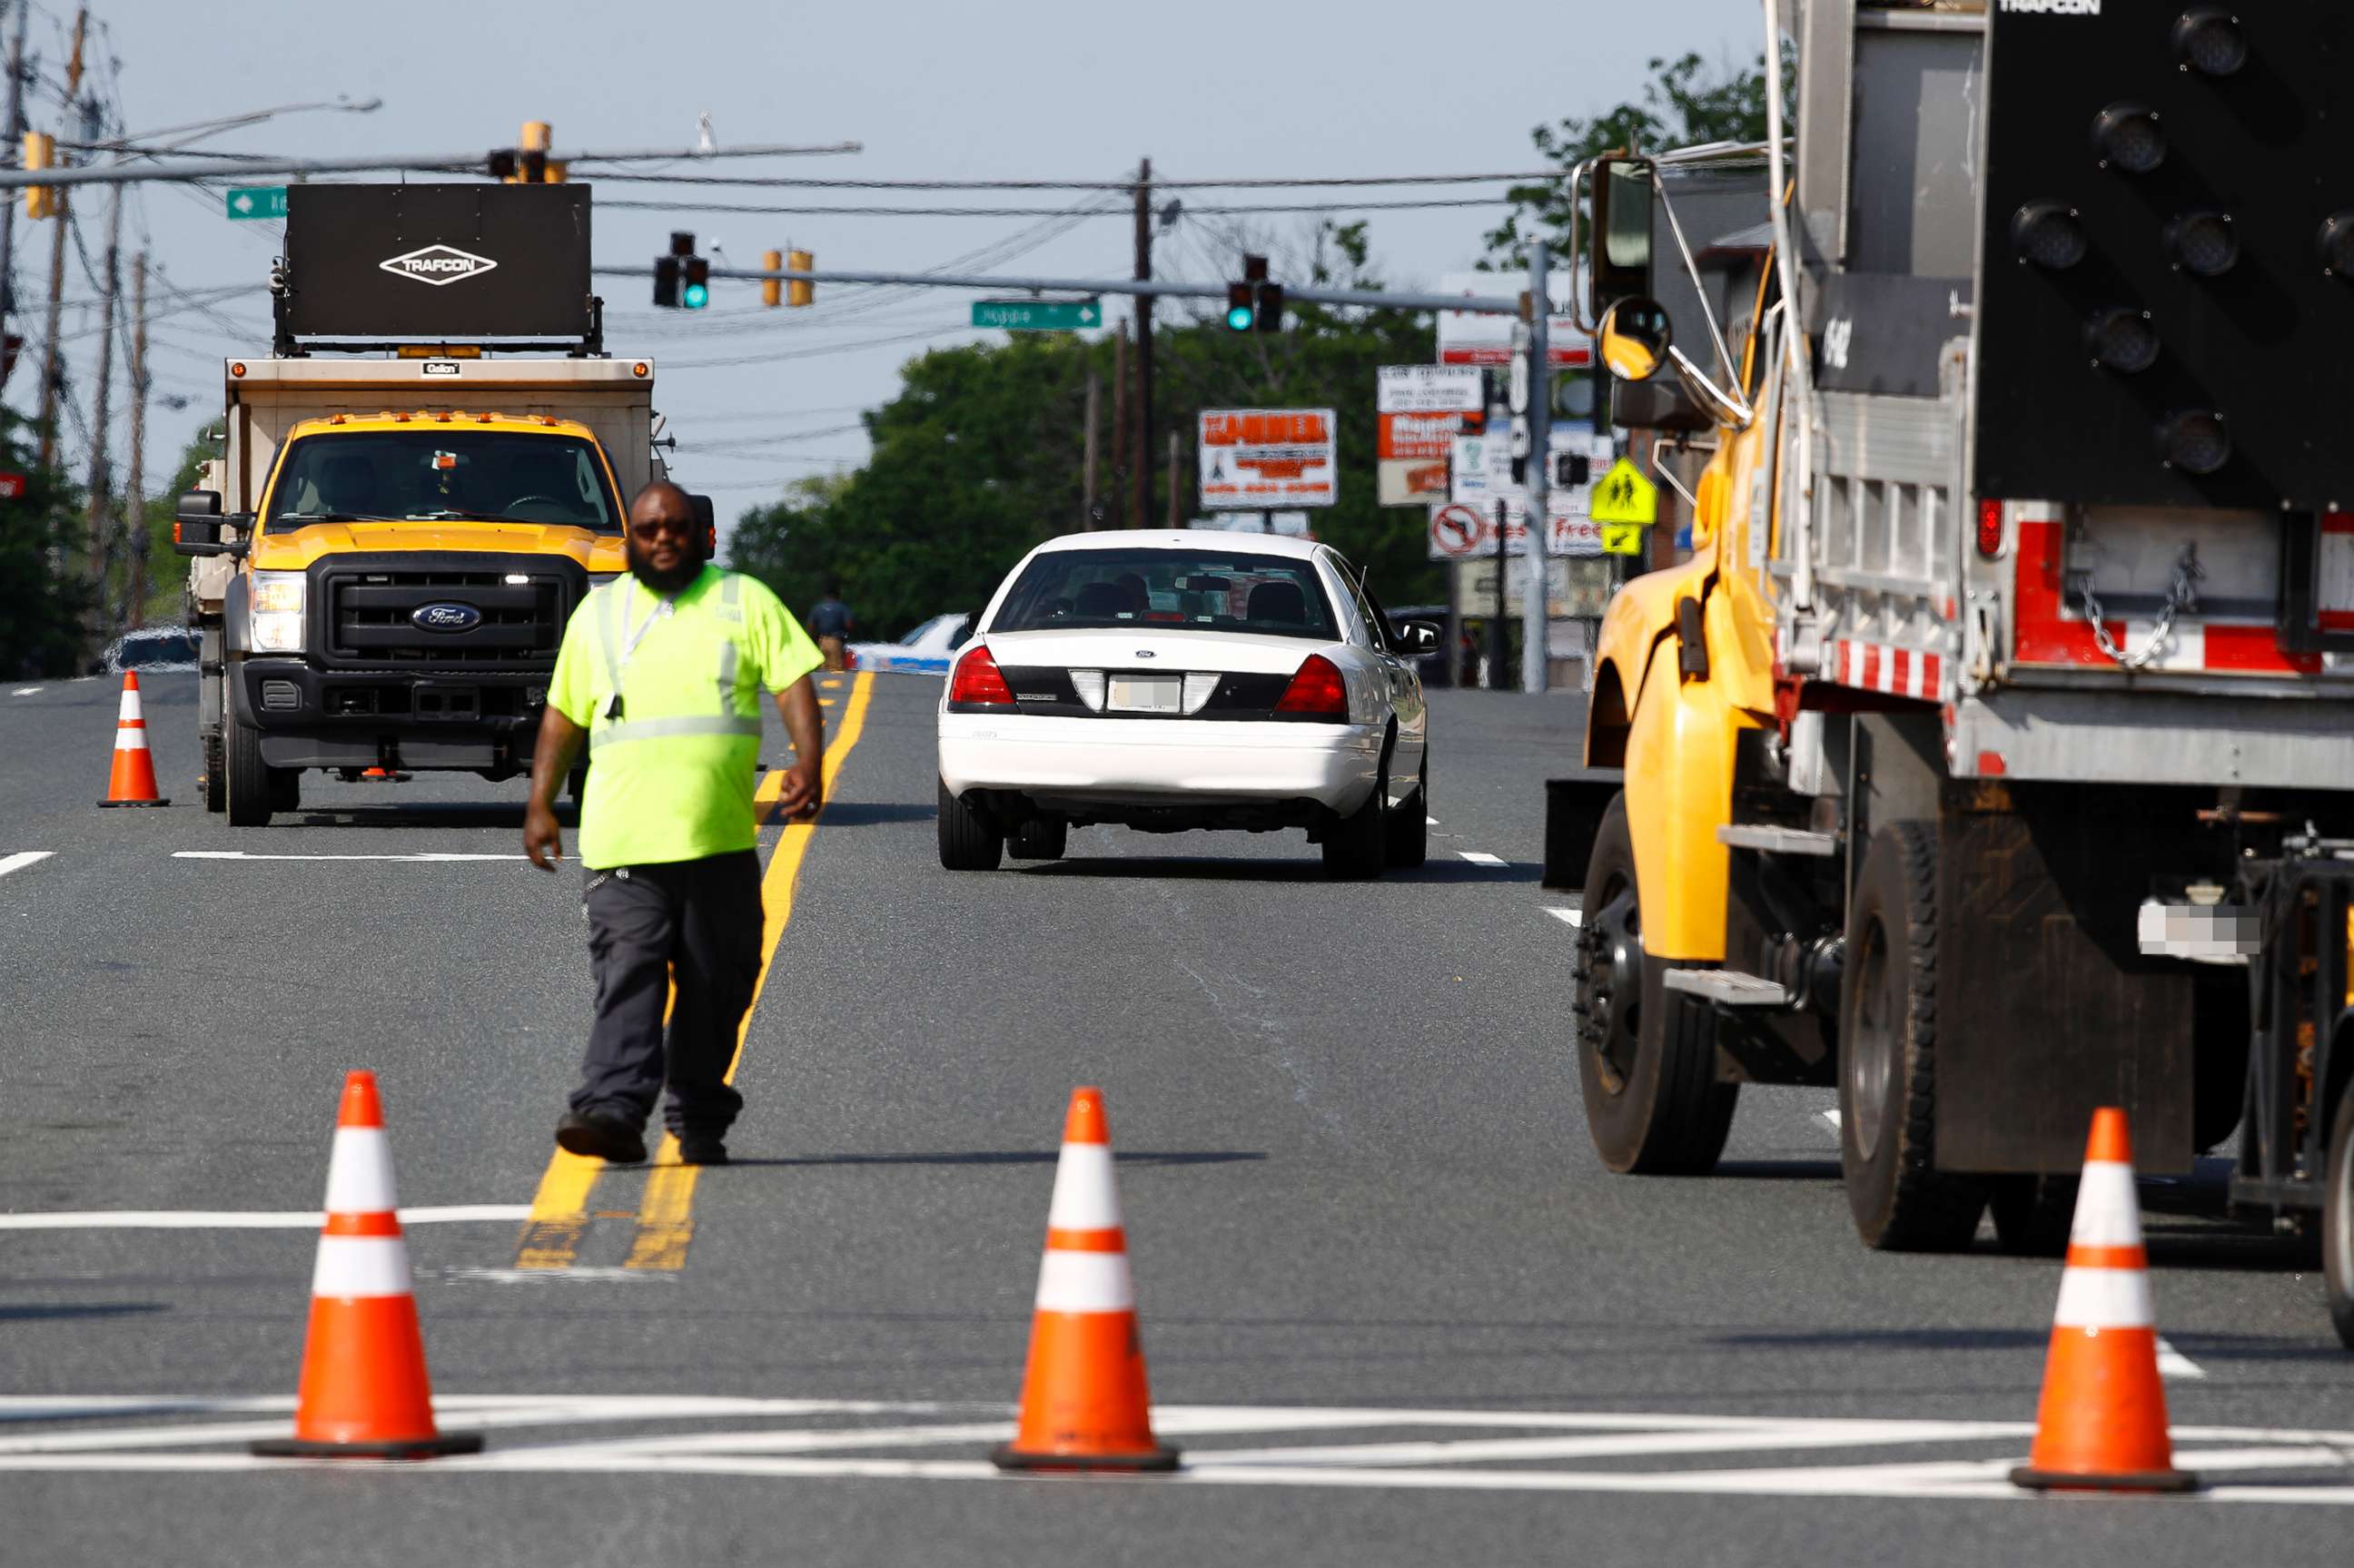 PHOTO: An emergency vehicle passes a roadblock near a scene, May 21, 2018, in Perry Hall, Md.